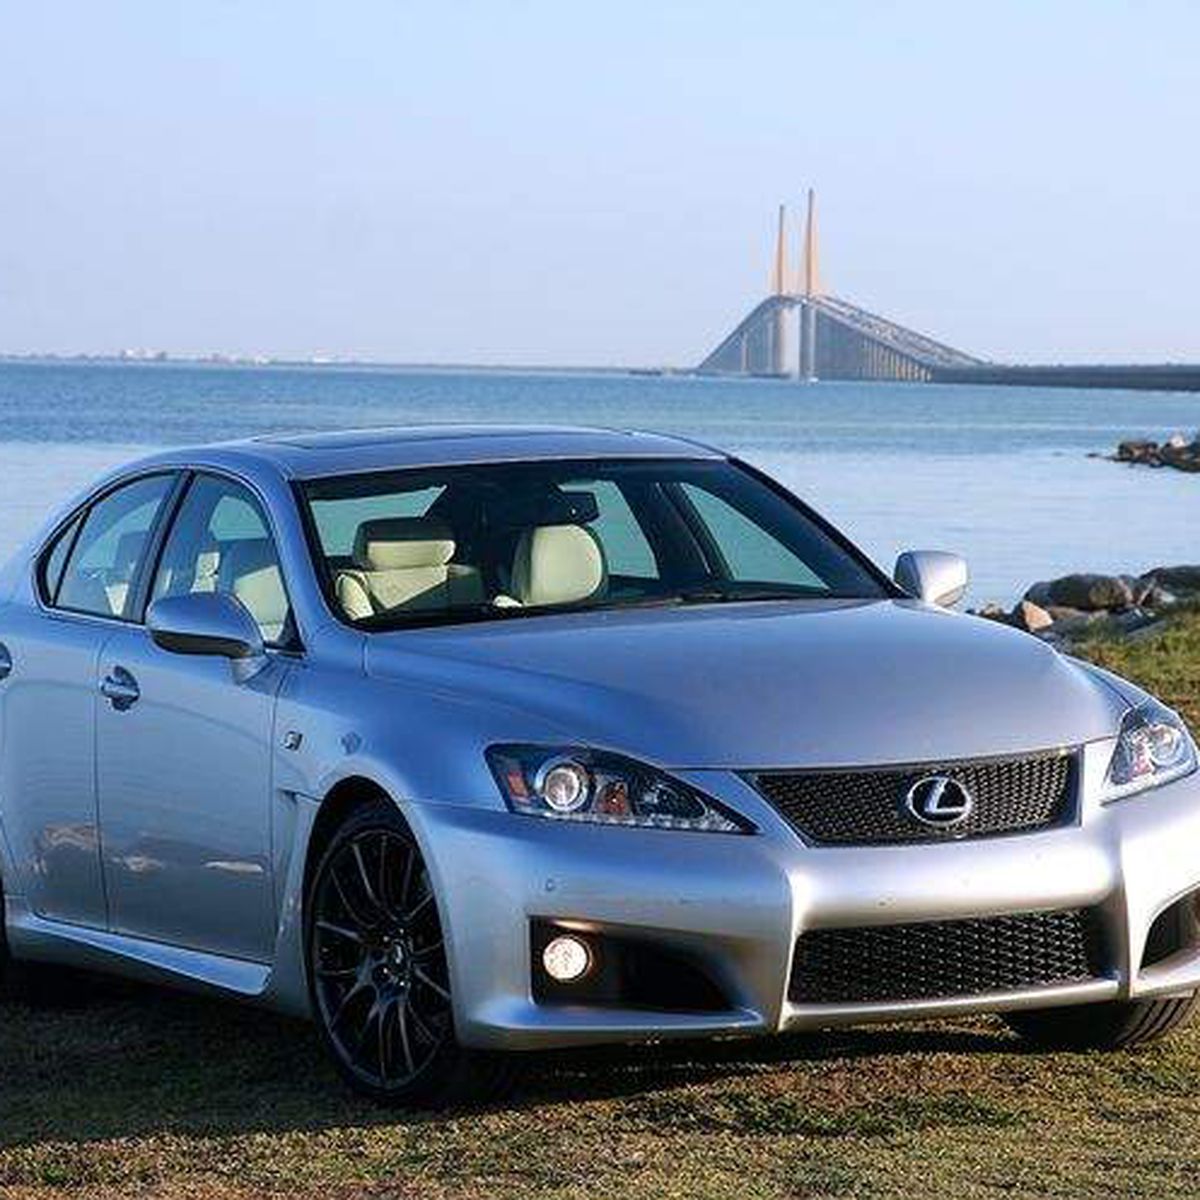 The Daily Drivers car review: 2013 Lexus IS F